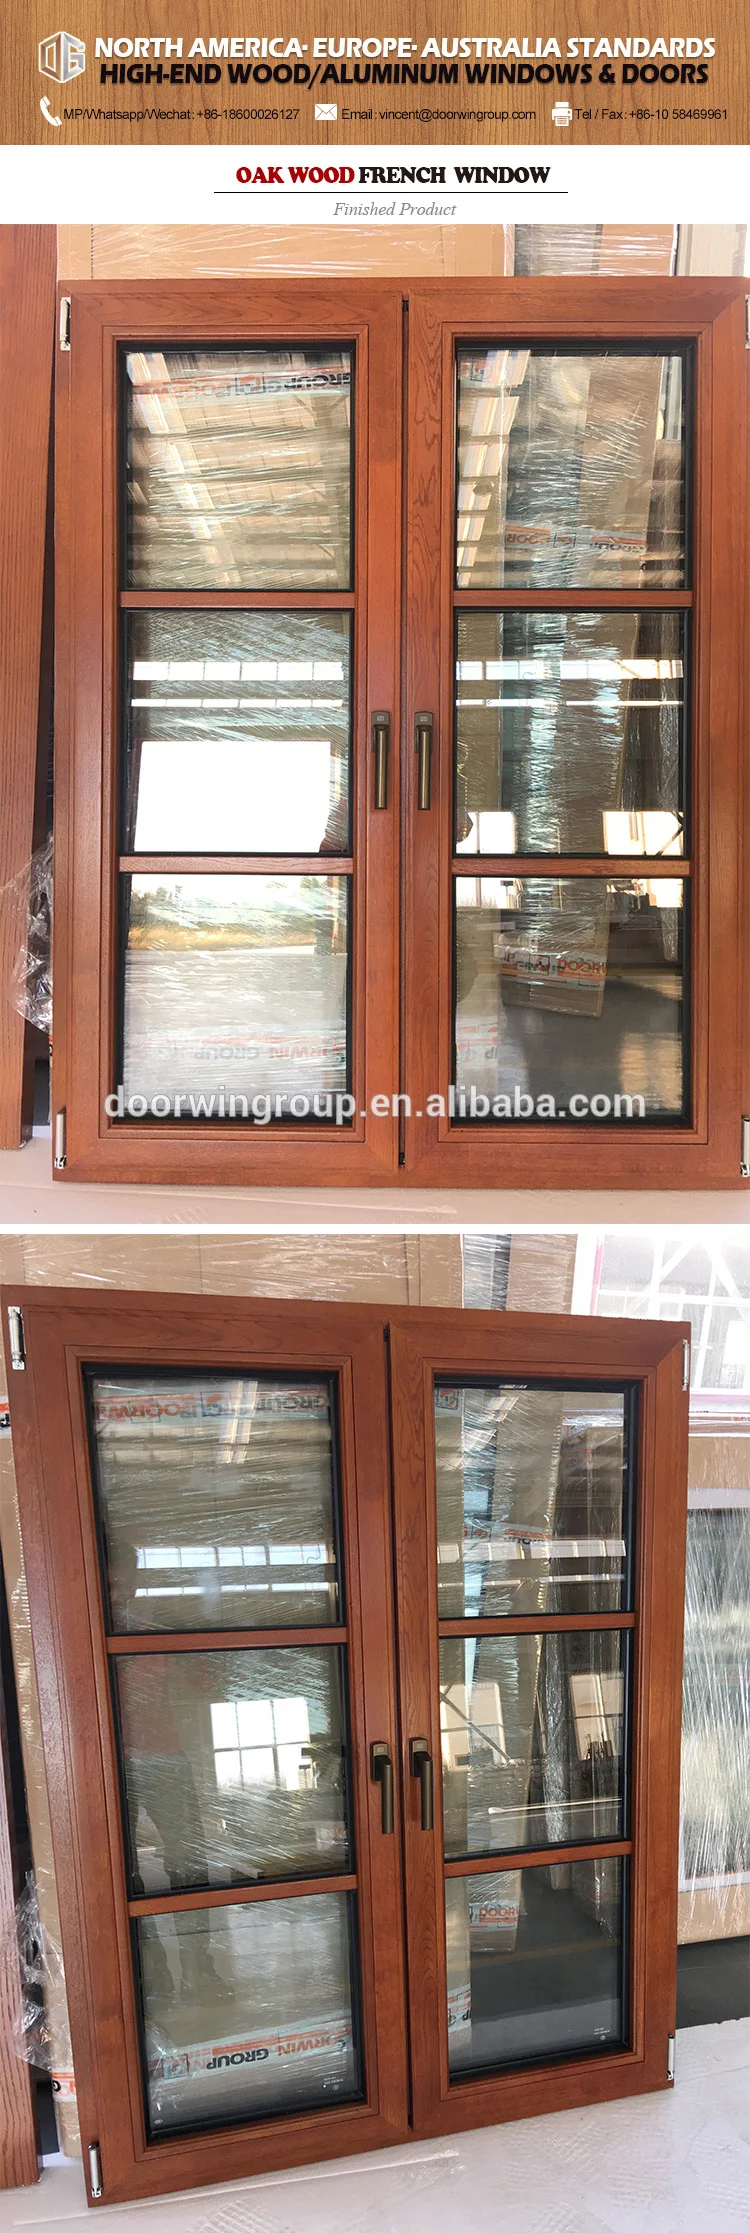 Fashion design of oak wood france window with double glazing glassand real grille design